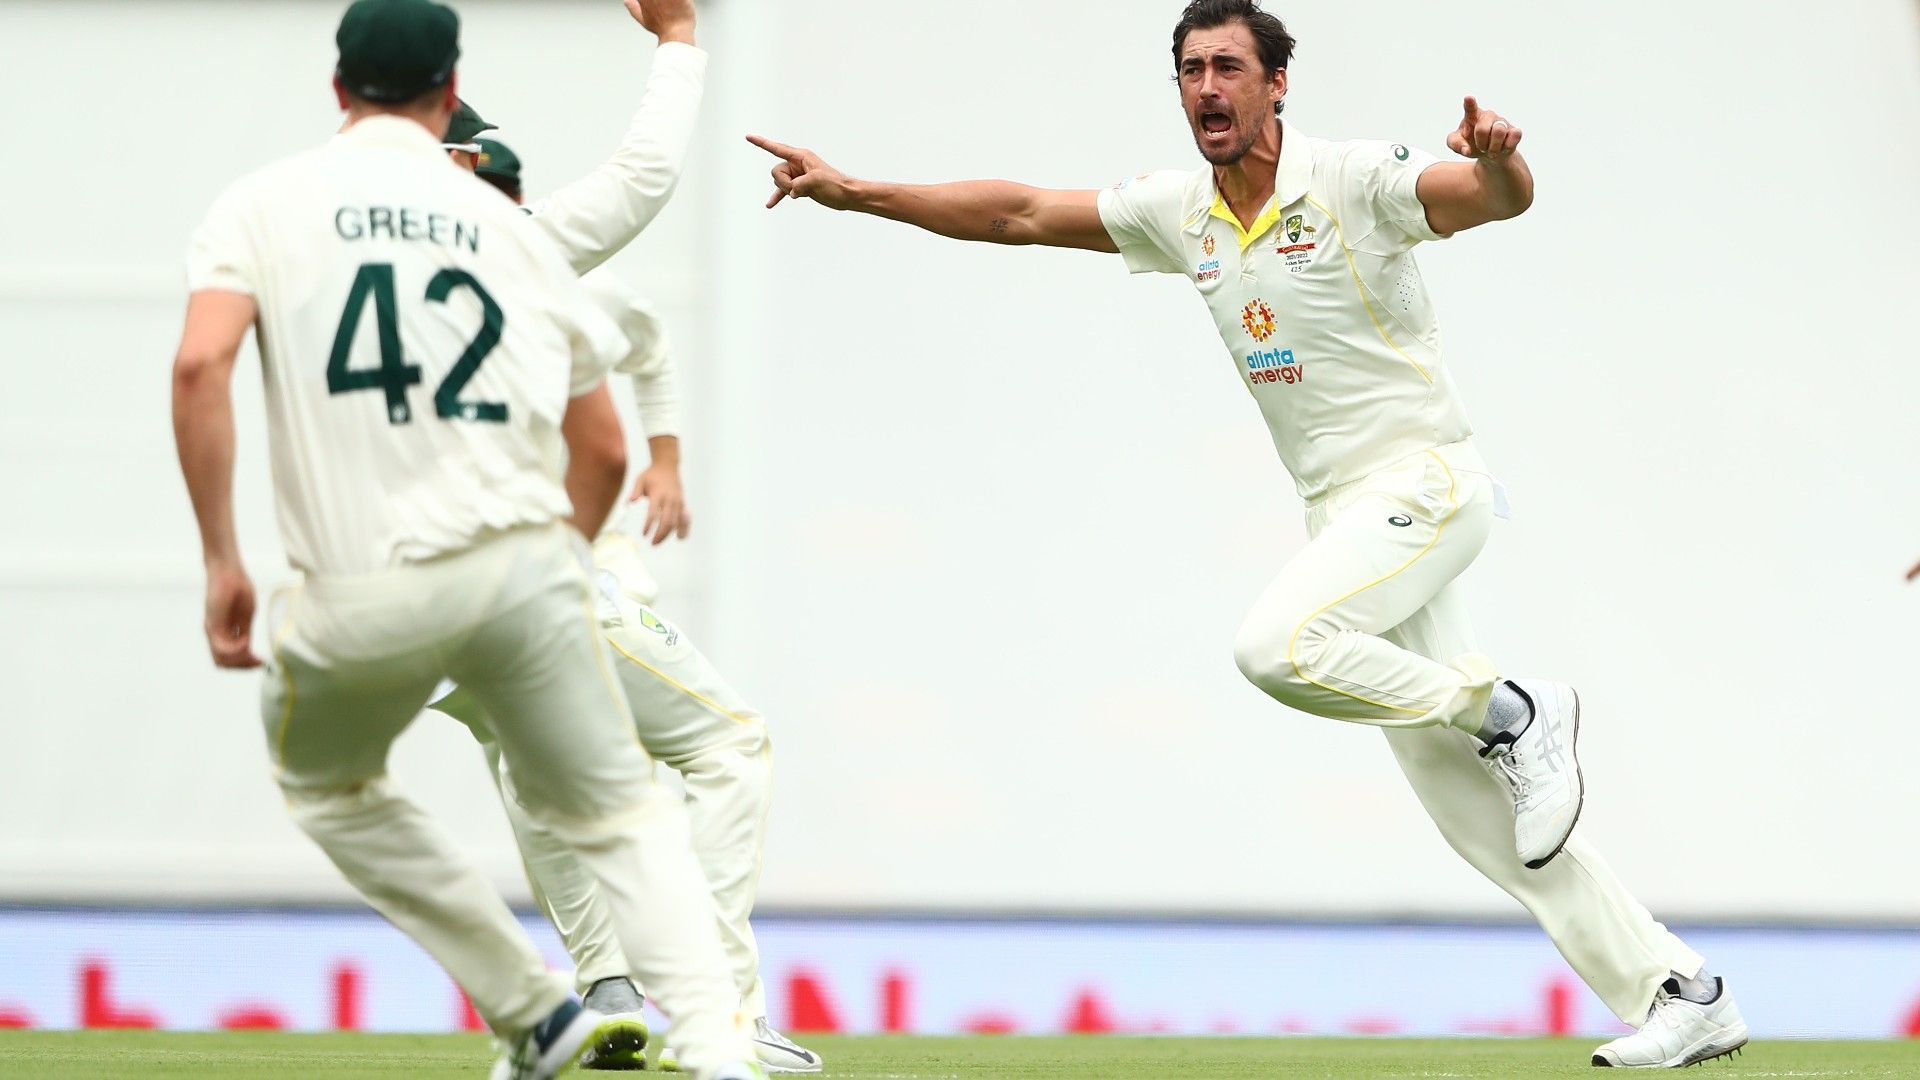 Mitchell Starc silences critics with wicket on first ball of the Ashes series